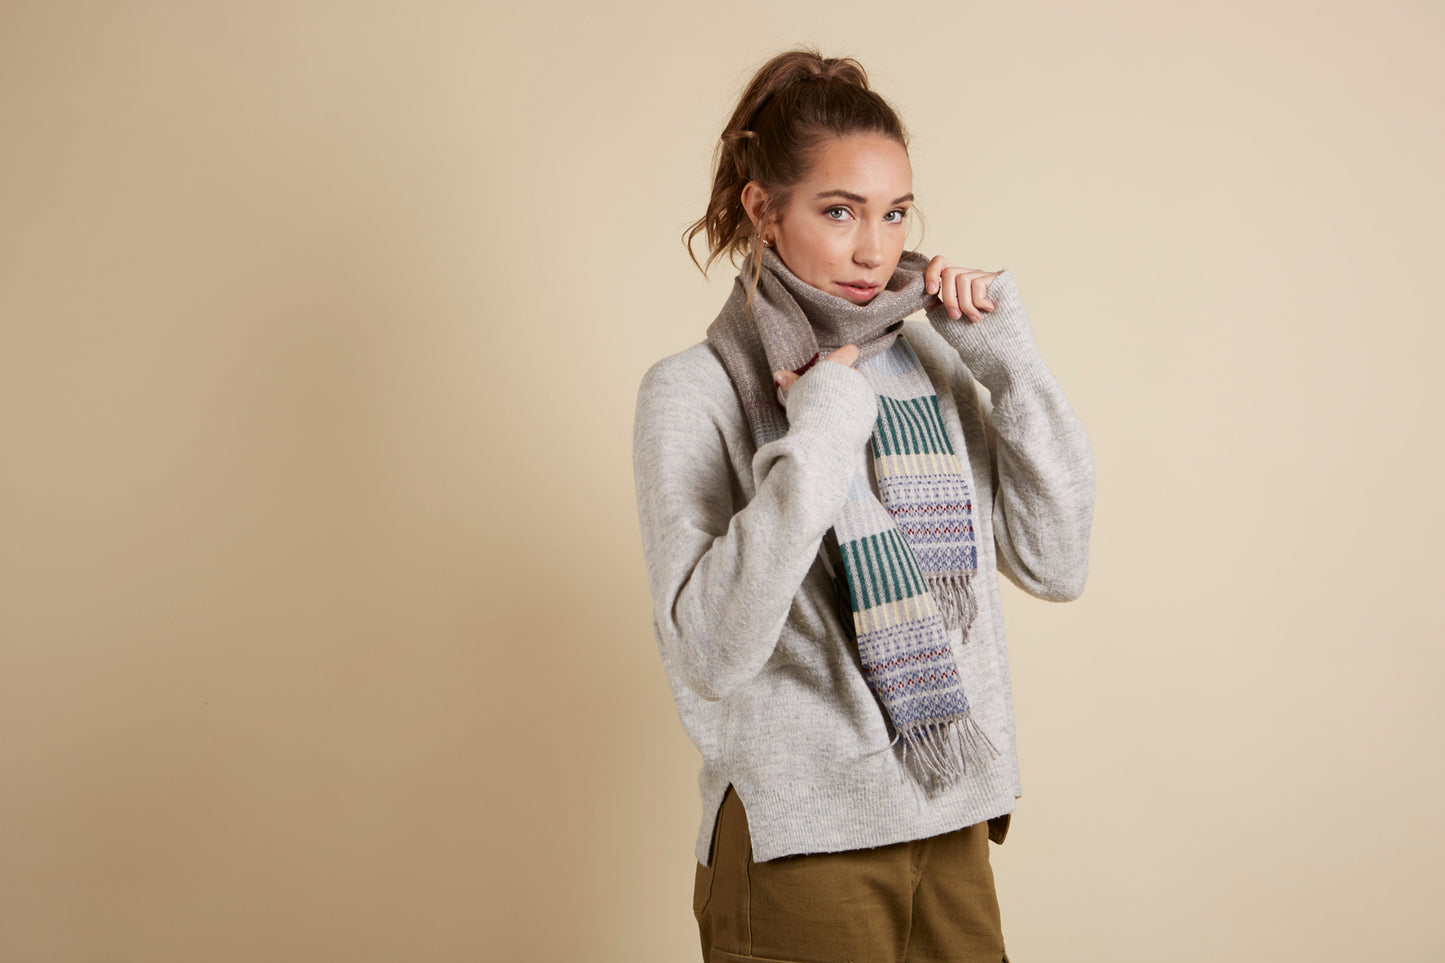 WALLACE+SEWELL - SCARF - ANOUILH - TAUPE